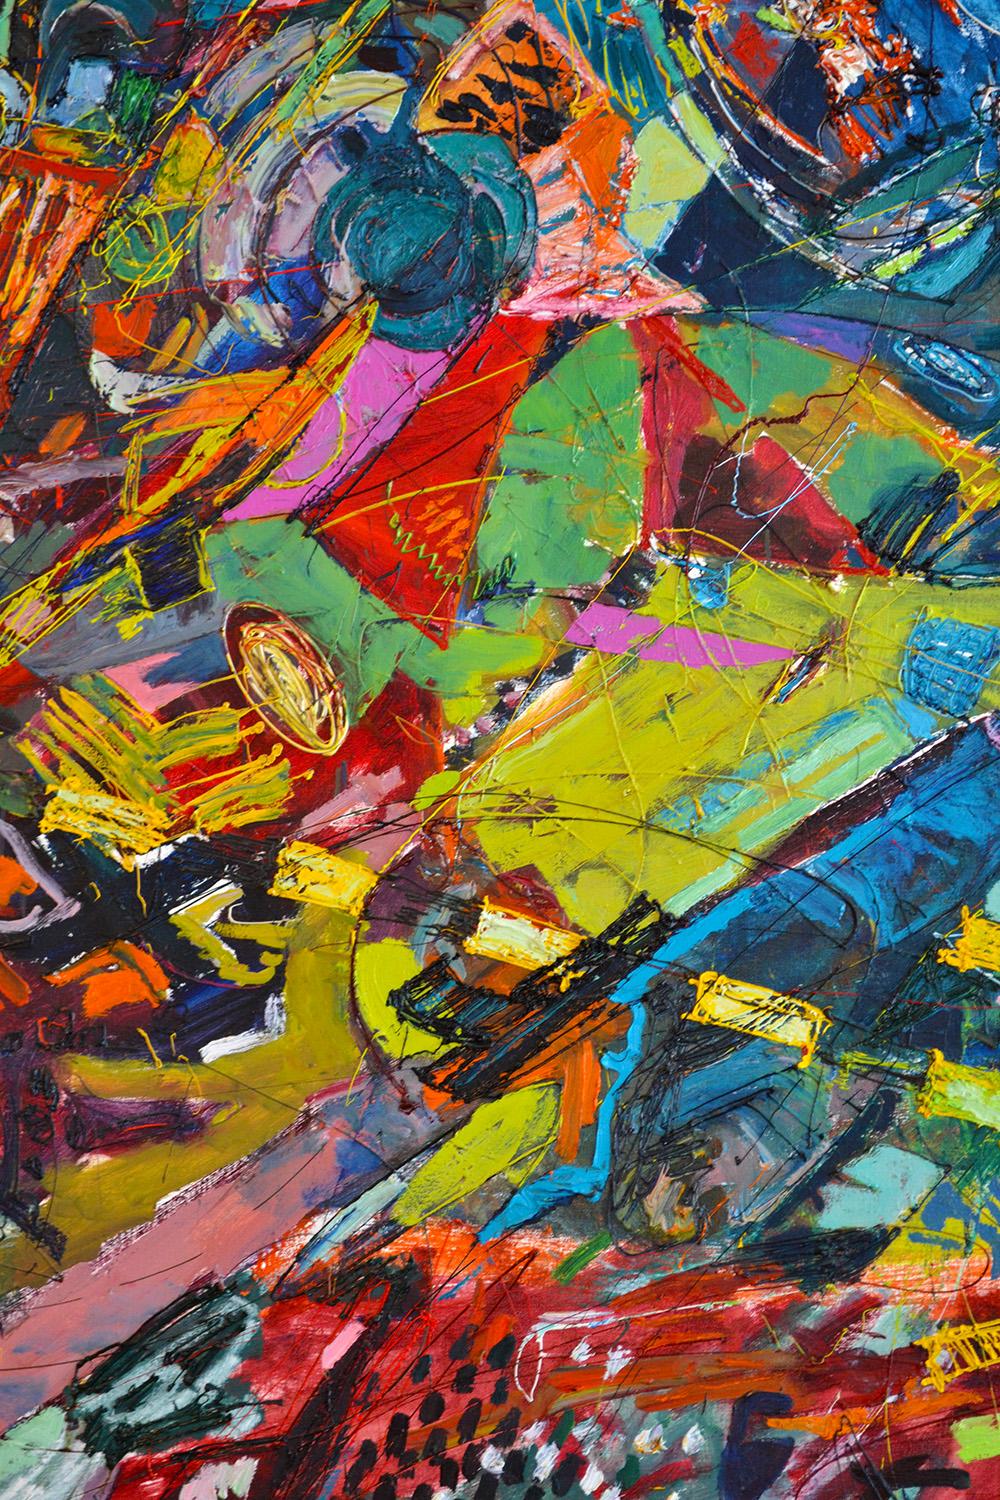 Late 20th Century Large Abstract Expressionist Oil on Canvas by Chuck Dugan, (1947-2007)